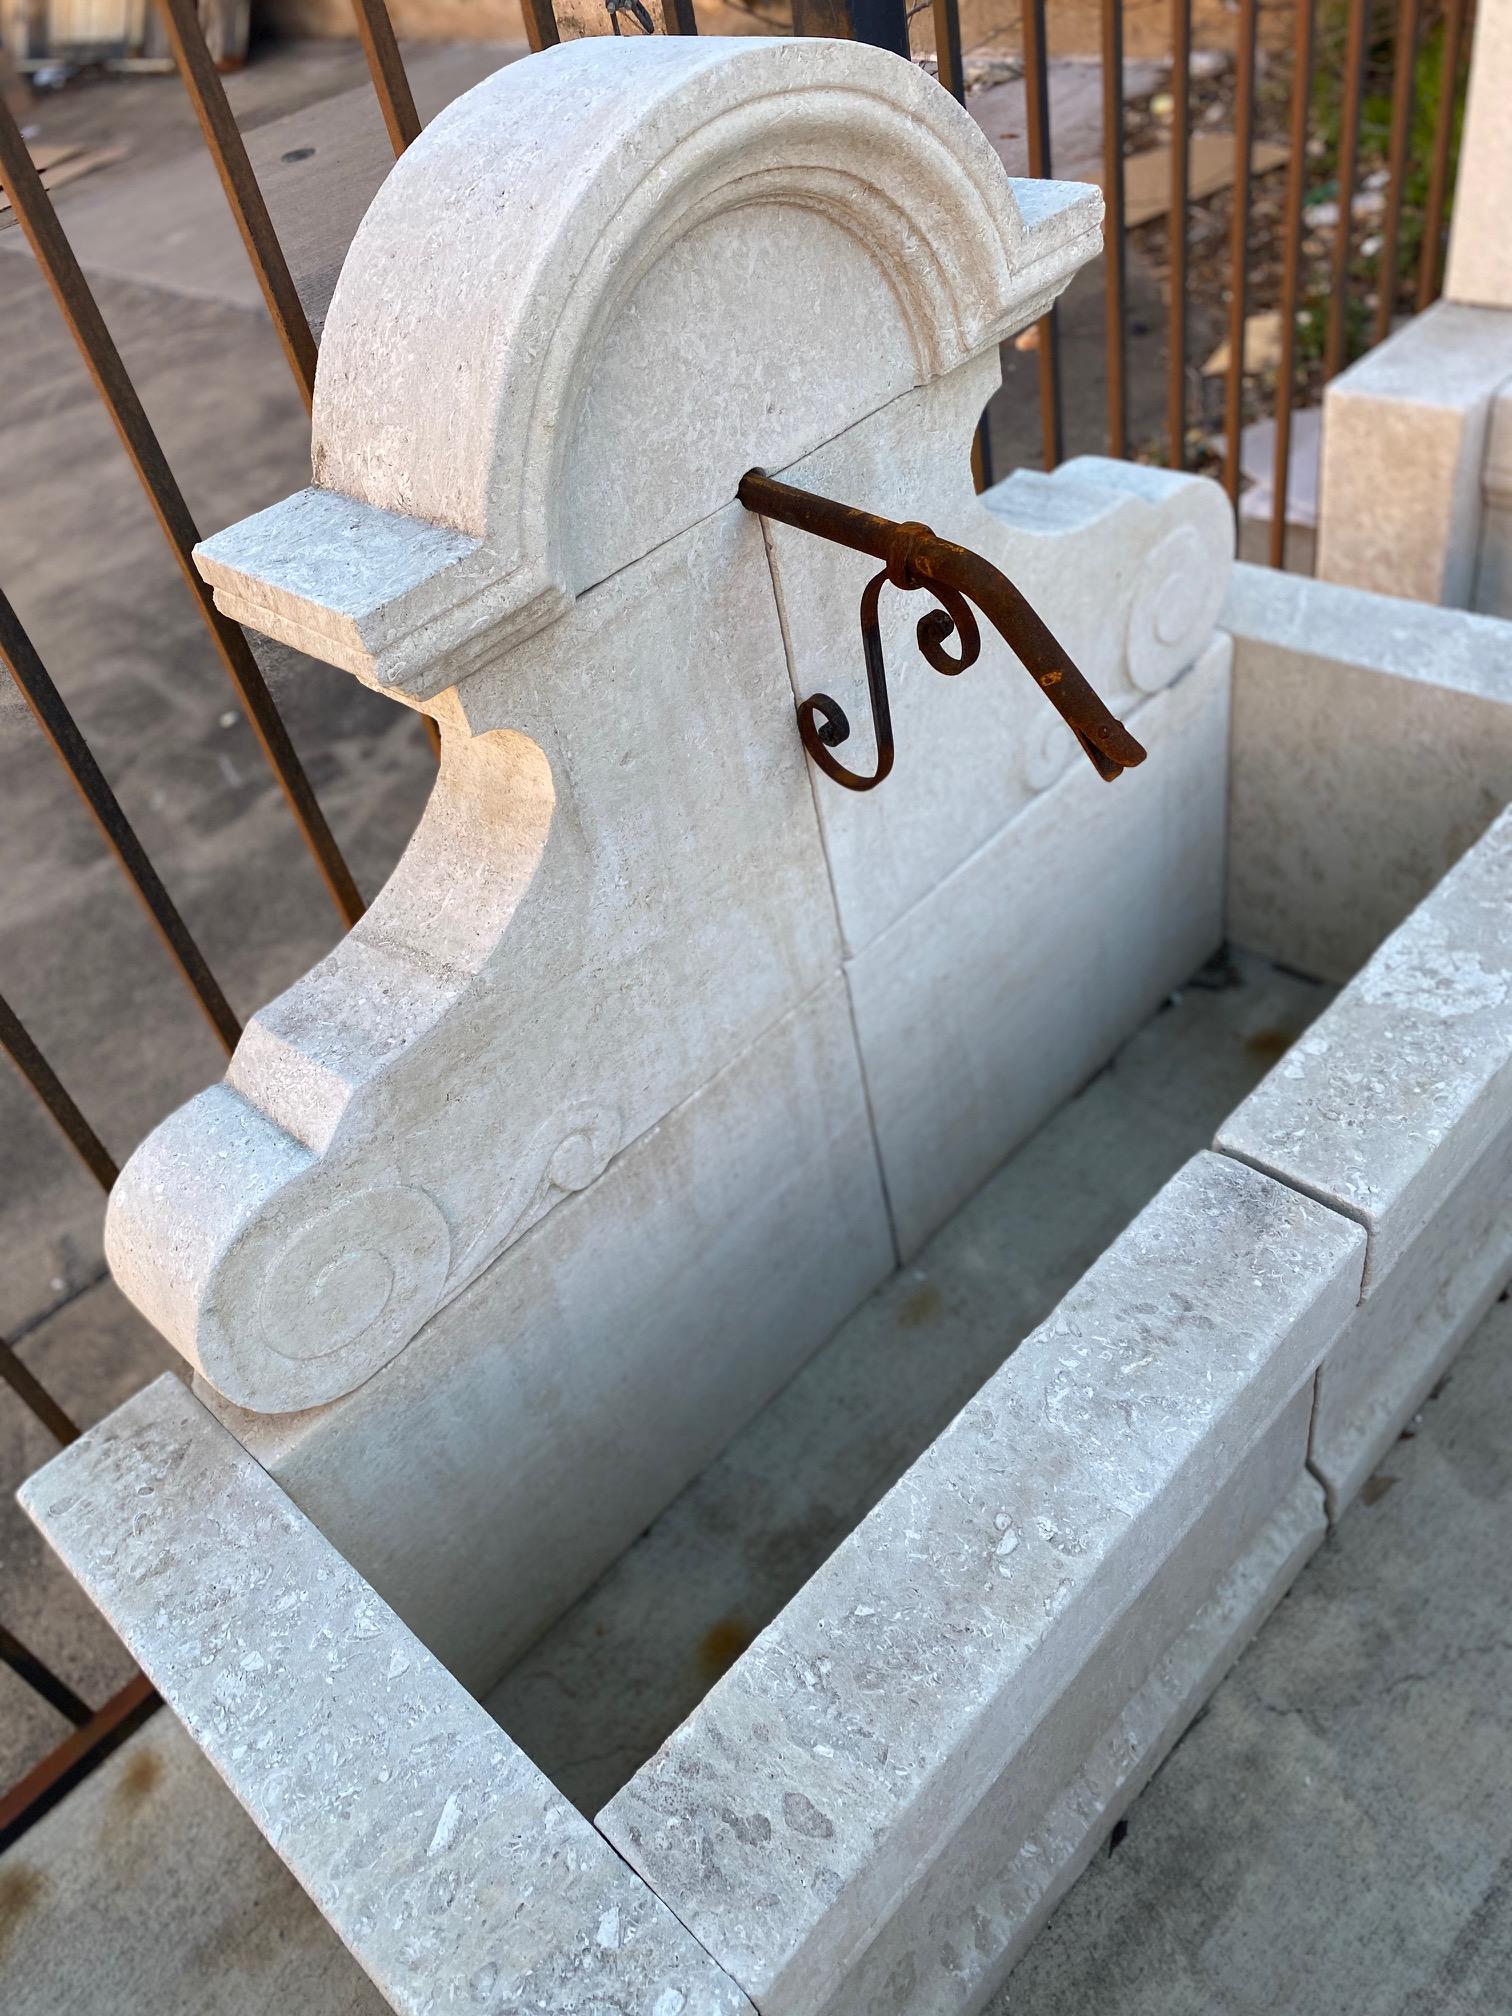 Here we offer a hand-carved limestone wall fountain with an iron down spout. This fountain has a classical French bonnet design for the crown and detail carvings at the base of the backplate that complete the French feel of the piece. Let the